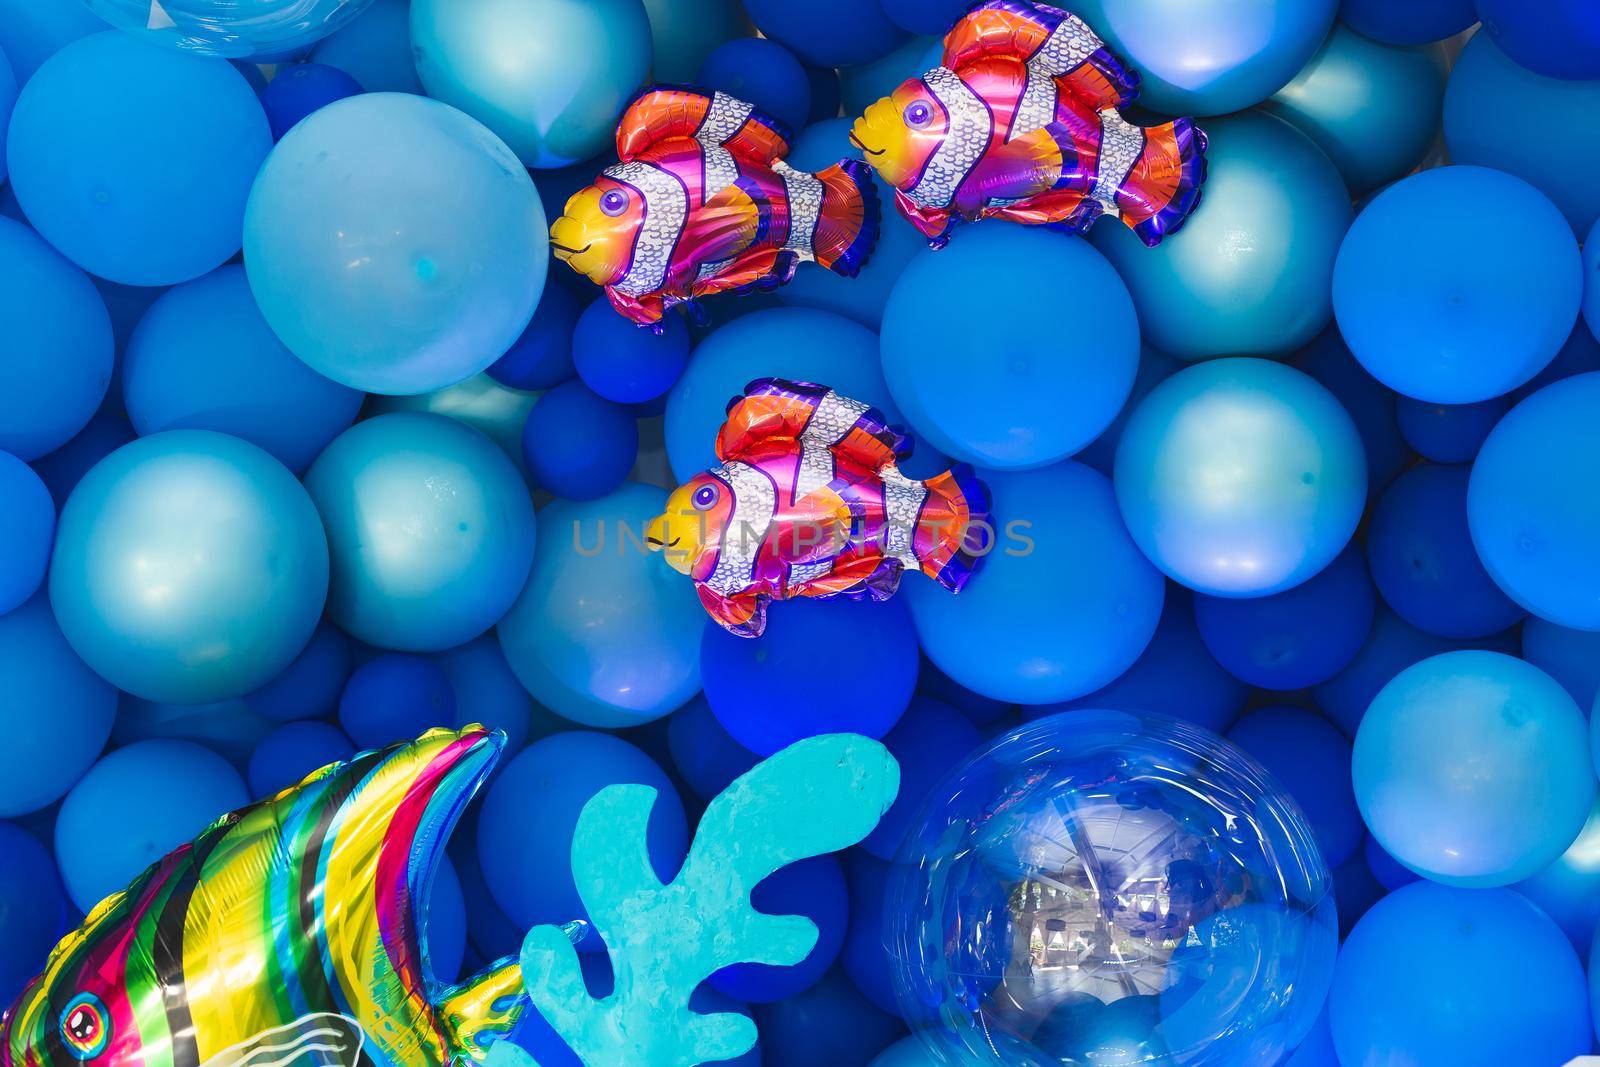 Marine-style decor of balloons, fish, and corals for the birthday photo zone by StudioPeace